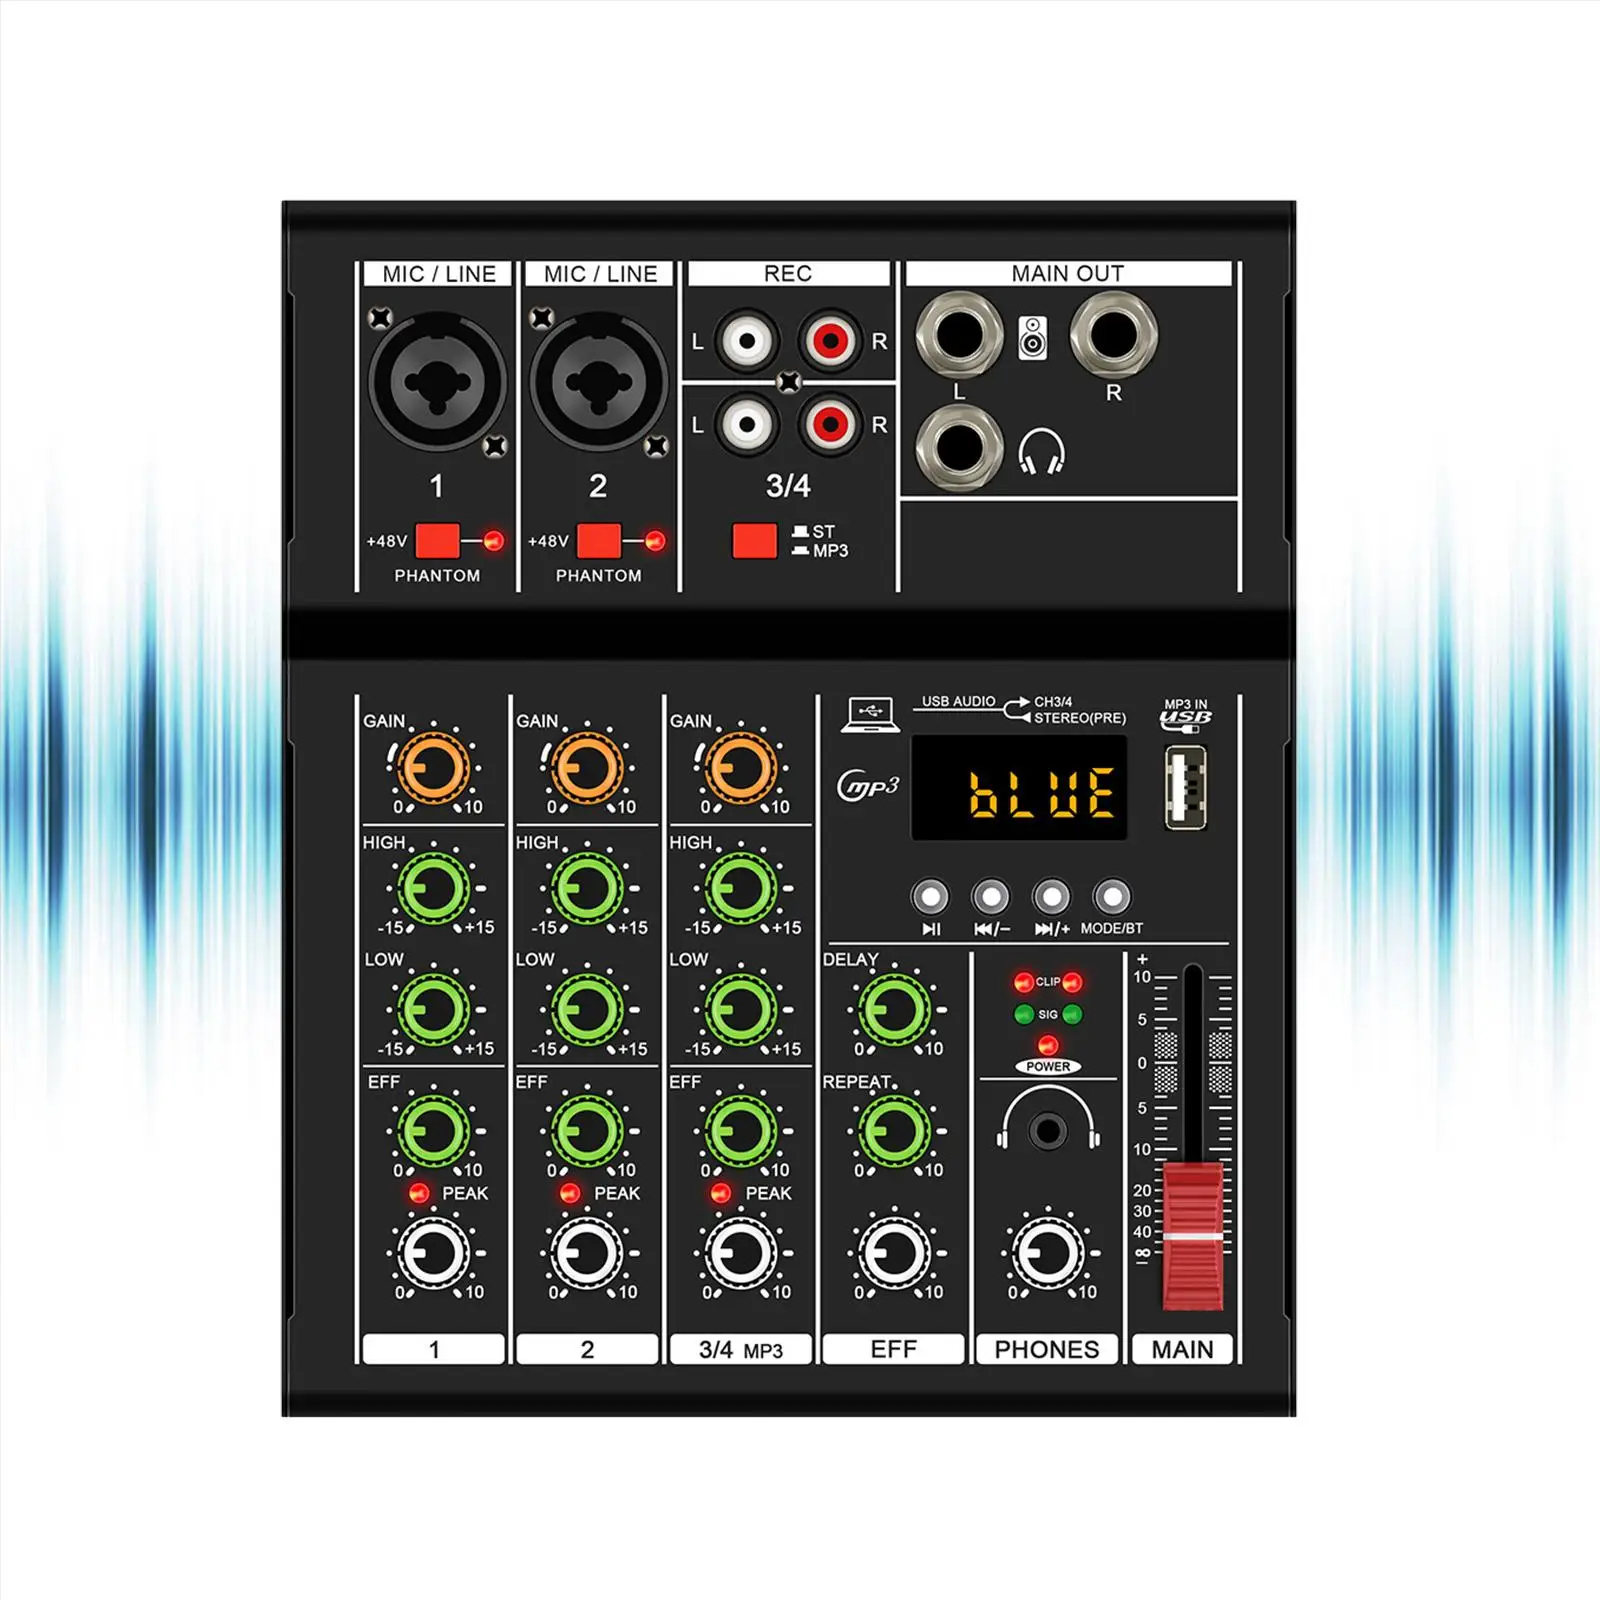 Studio Audio Mixer 4 Channel Portable Professional Sound Board Sound Mixing Console for Karaoke Recording Beginners DJ Broadcast